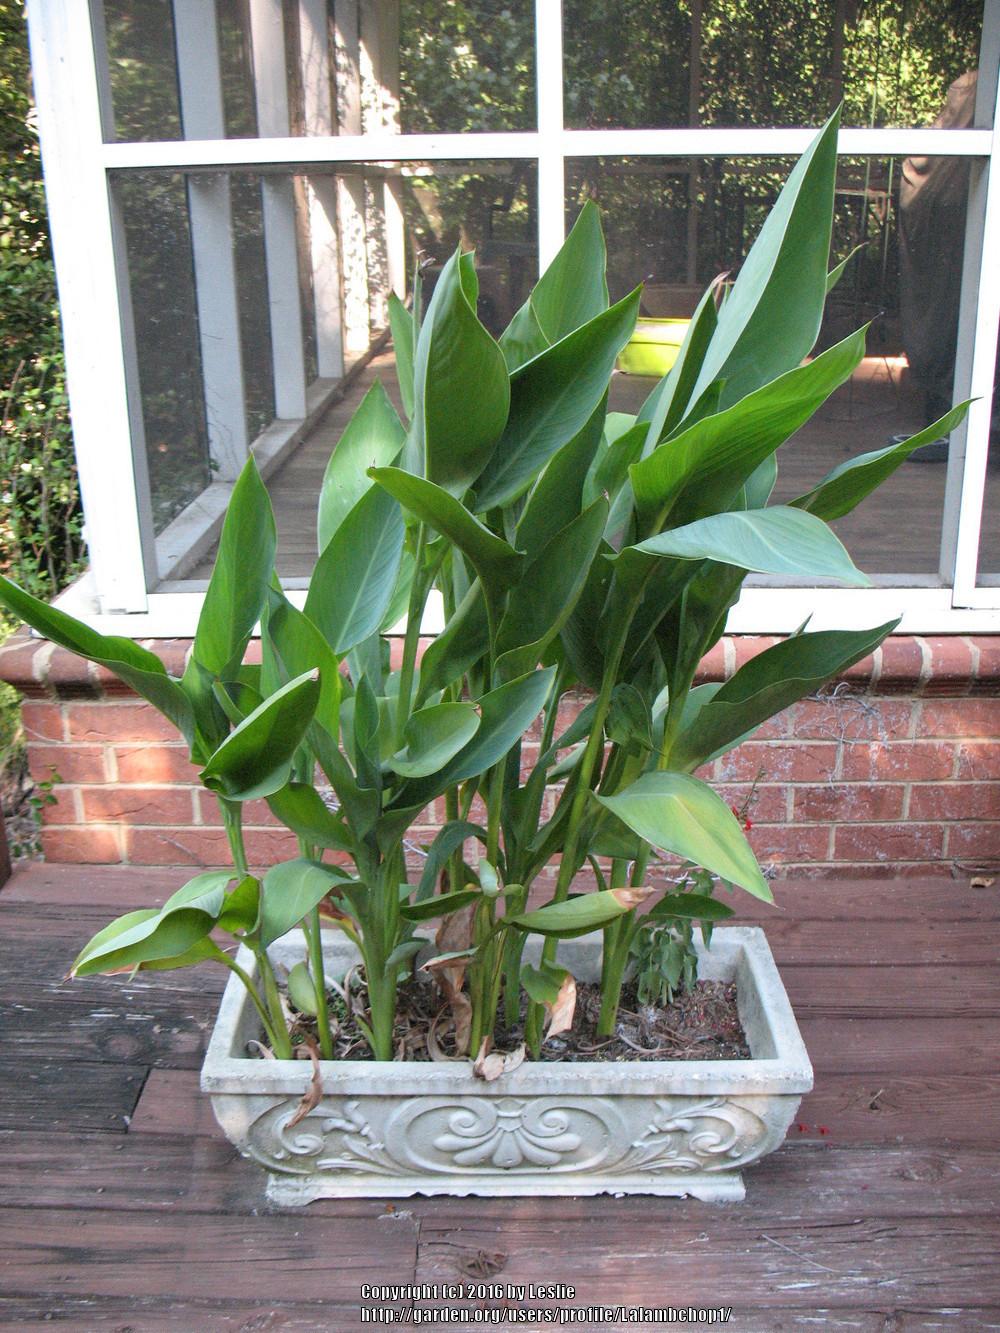 Photo of Cannas (Canna) uploaded by Lalambchop1